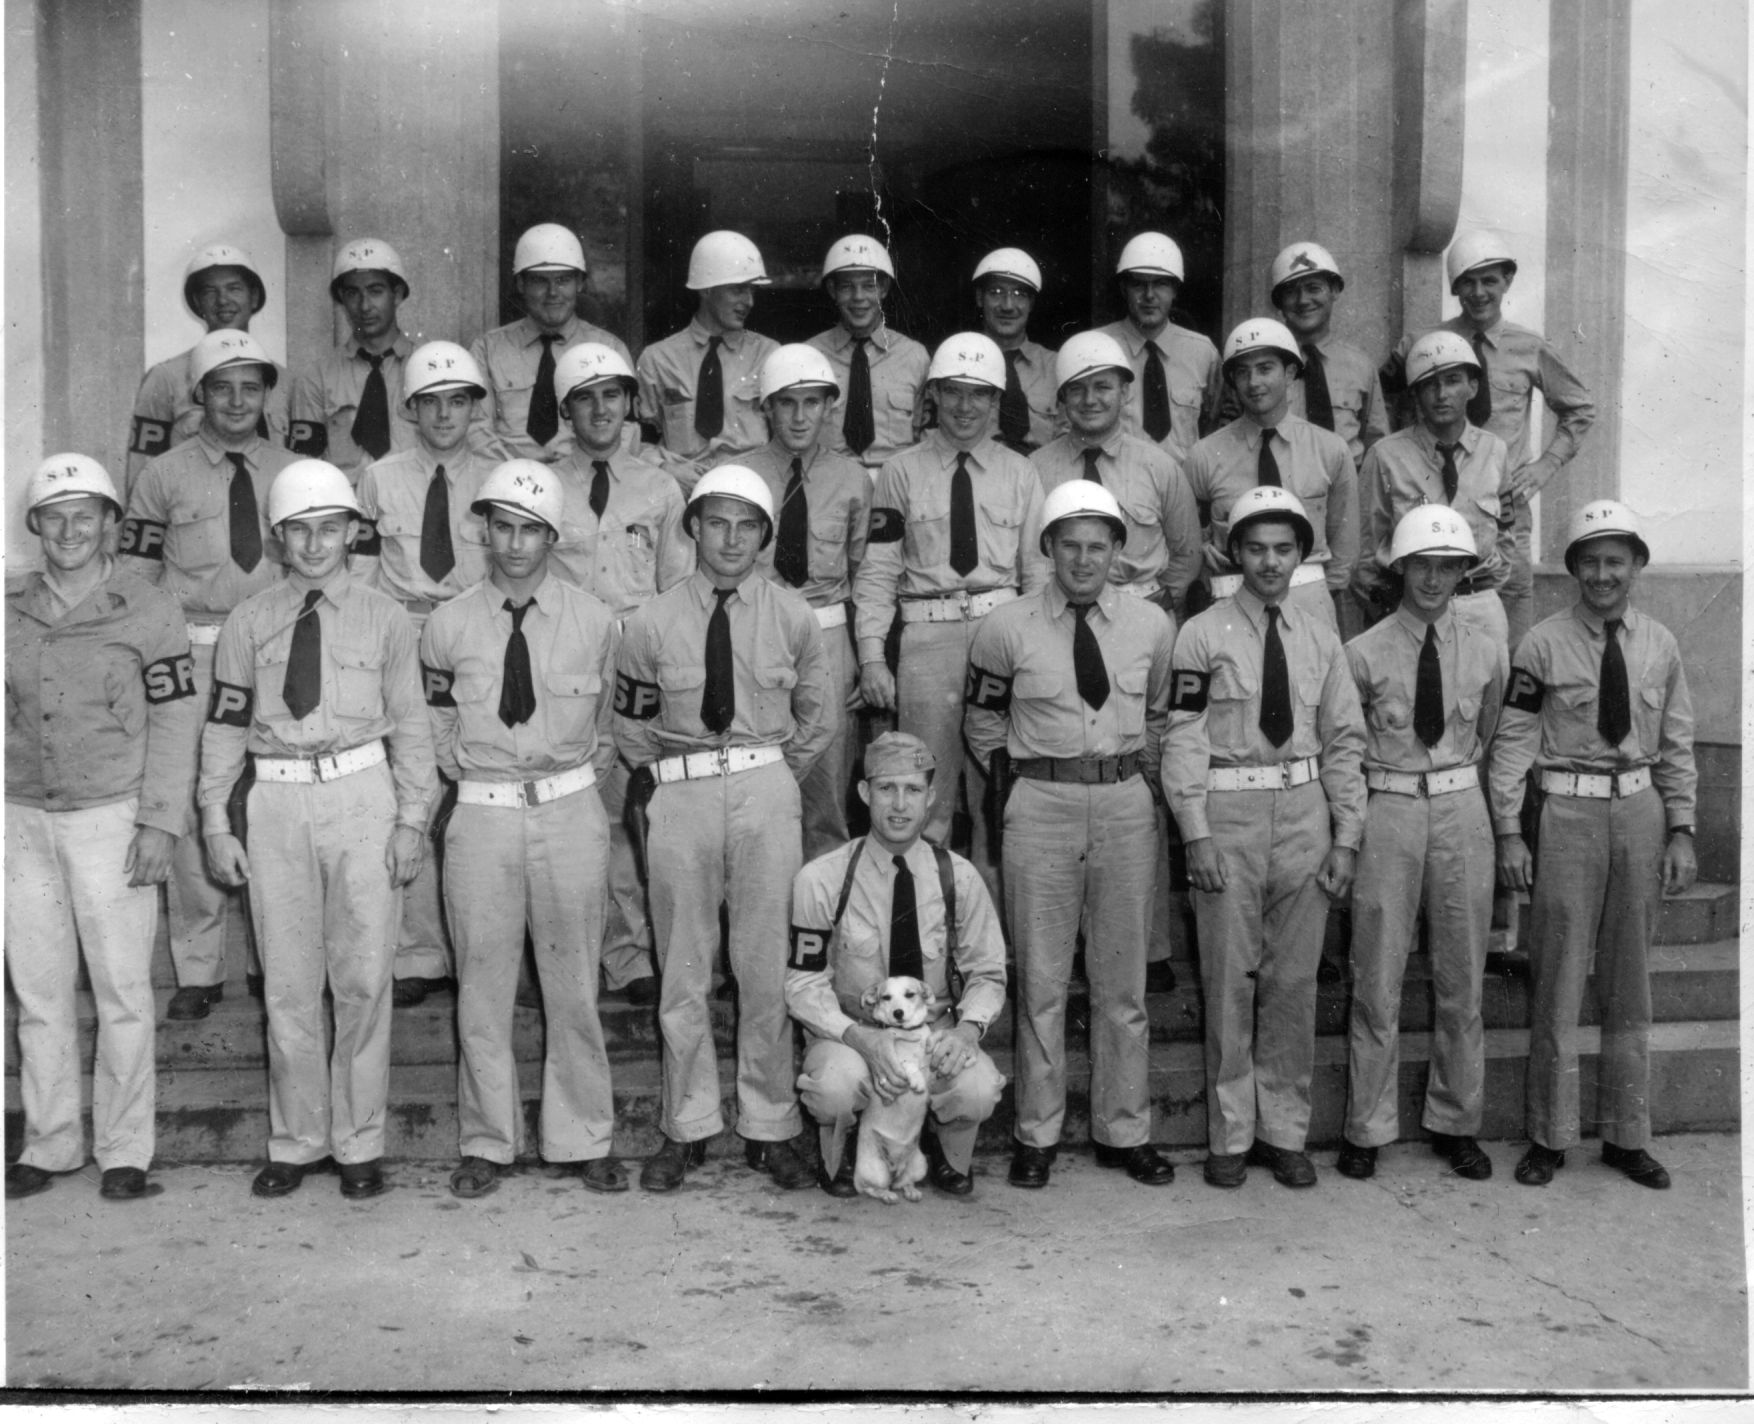 My grandmother's brother Francis Webb is 3rd from the right, middle row in this picture. They are wearing bands that say SP, not sure if this stood for Staff Police, but I am thinking it's some kind of military police group. View full size.